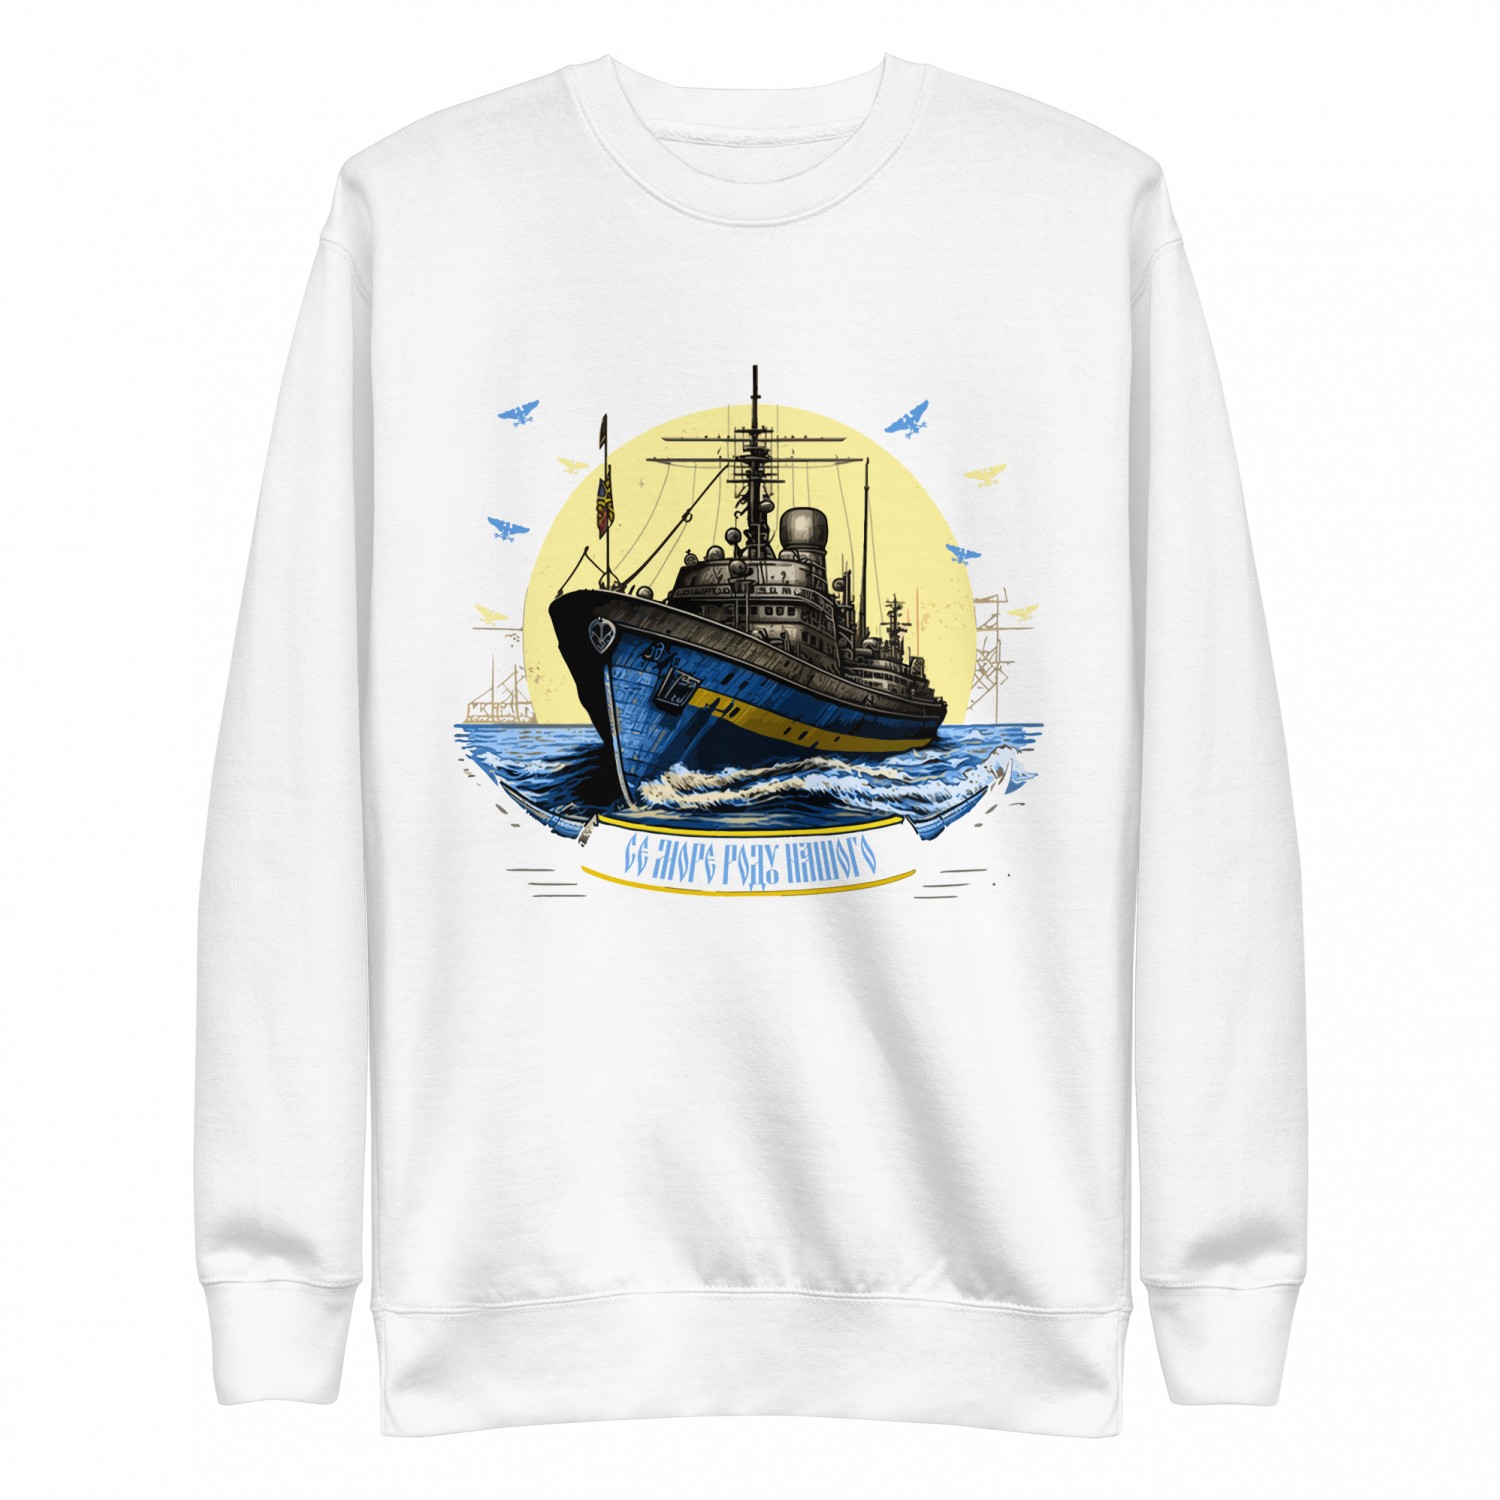 Buy a warm sweatshirt with a Ship and the sea